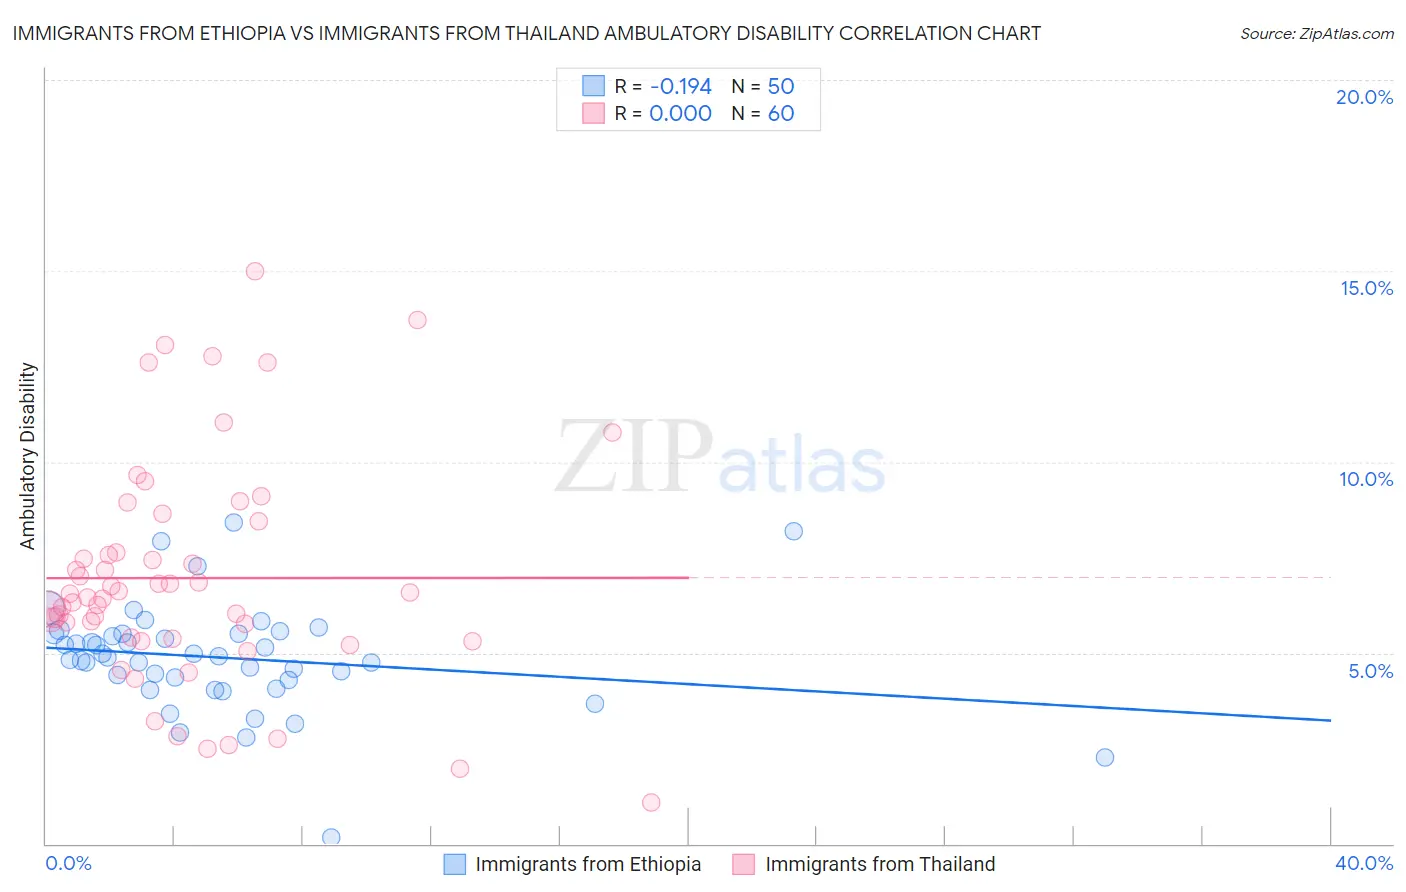 Immigrants from Ethiopia vs Immigrants from Thailand Ambulatory Disability